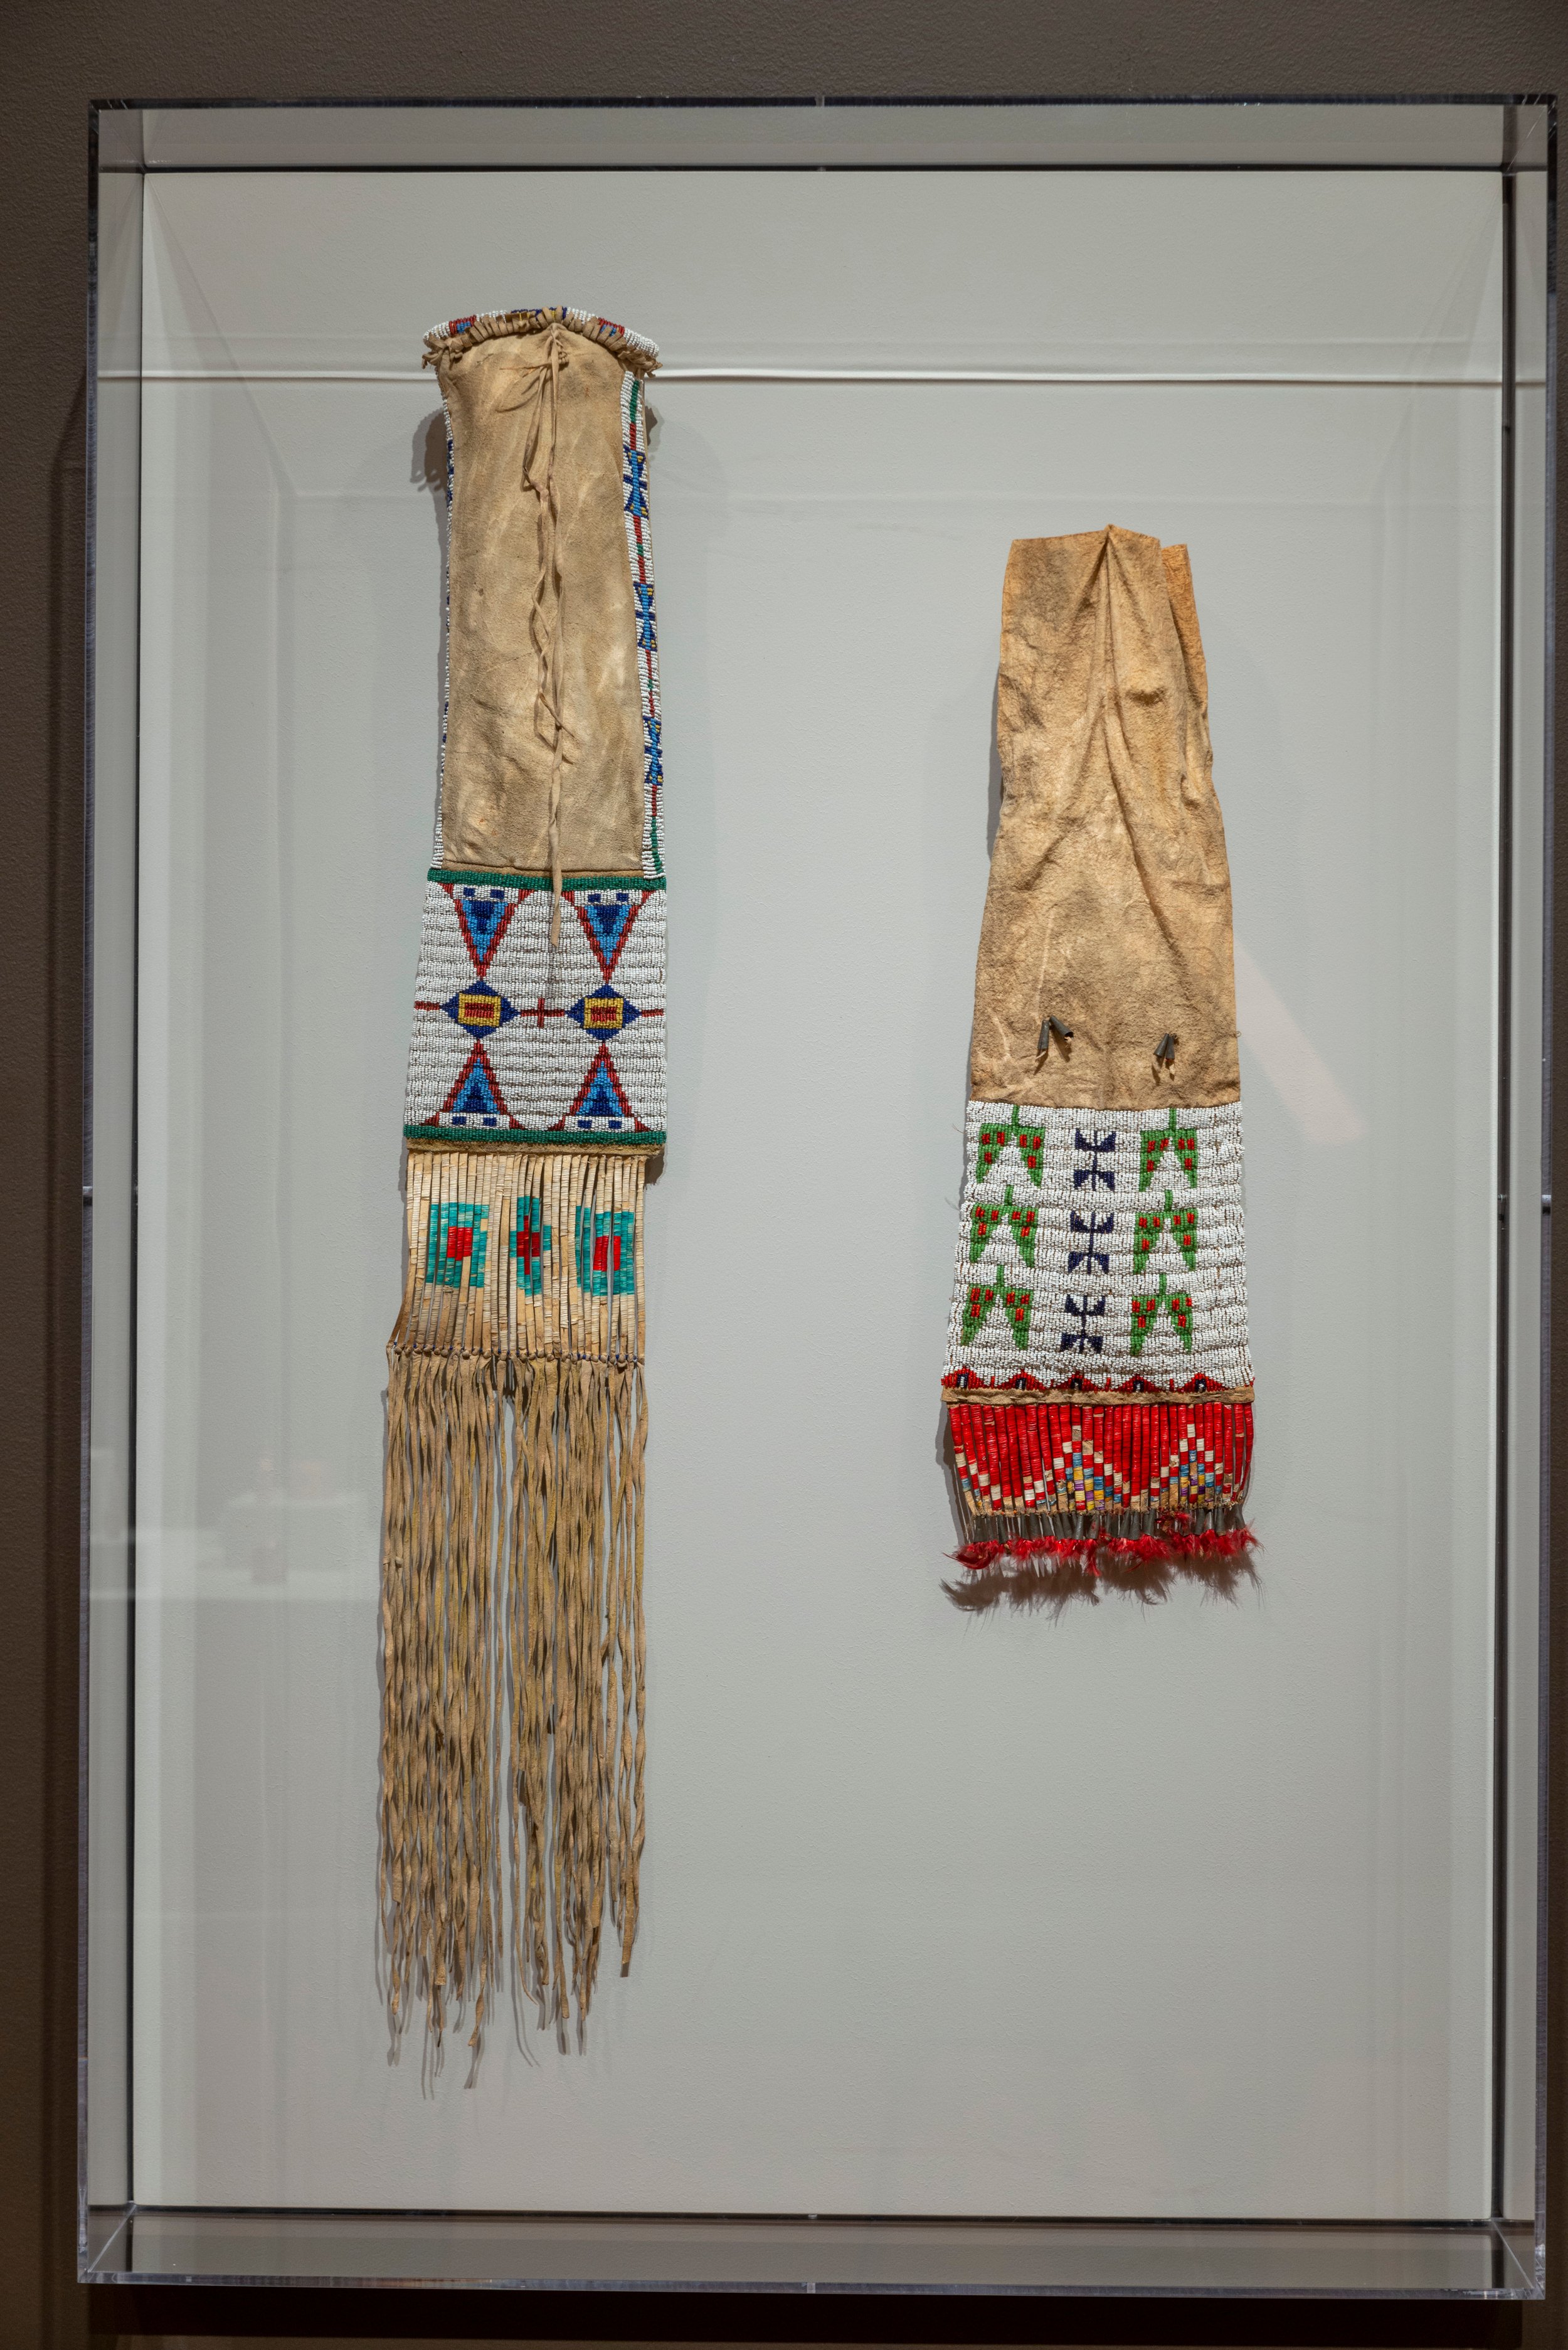  LEFT TO RIGHT  Unidentified Lakota Artist   Pipe Bag&nbsp;   Late 19th century  Hide, porcupine quills, glass beads, feathers, metal  GIFT OF MRS. RICHARD W. CASE, SPARKS, MARYLAND, BMA 1985.132     Unidentified Lakota Artist   Pipe Bag   c. 1880s D